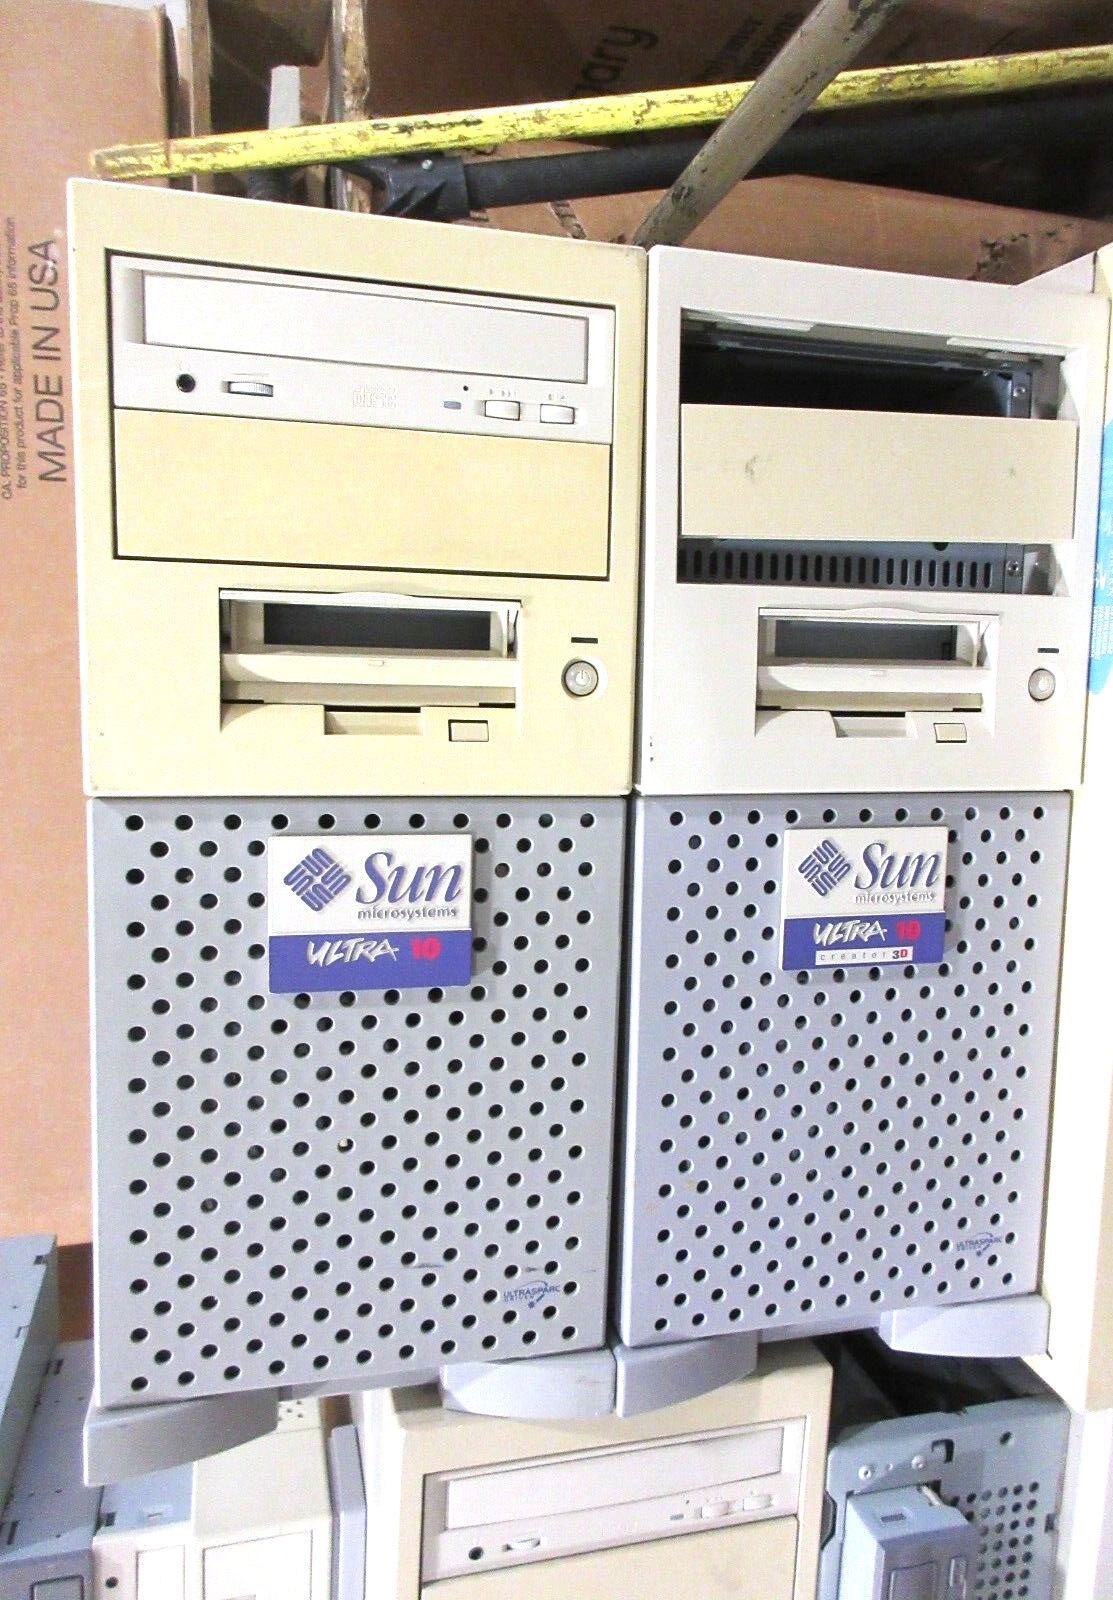 Lot of (3) Sun Microsystems Ultra 10 Workstation UltraSPARC (Missing some parts)